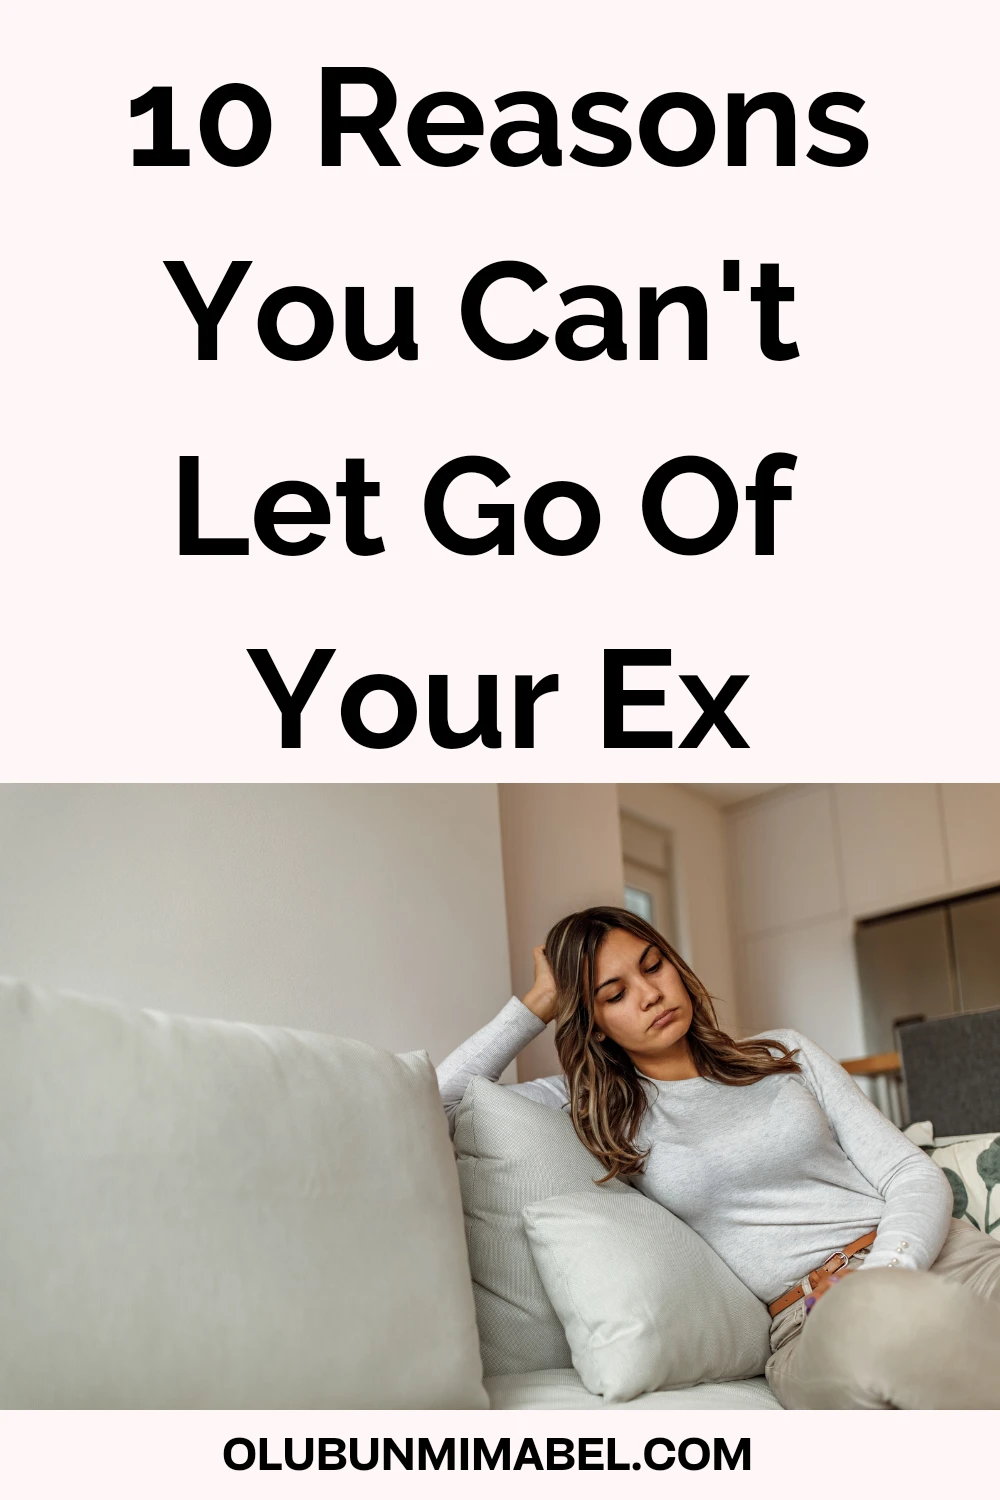 Why Can't I Let Go of My Ex?